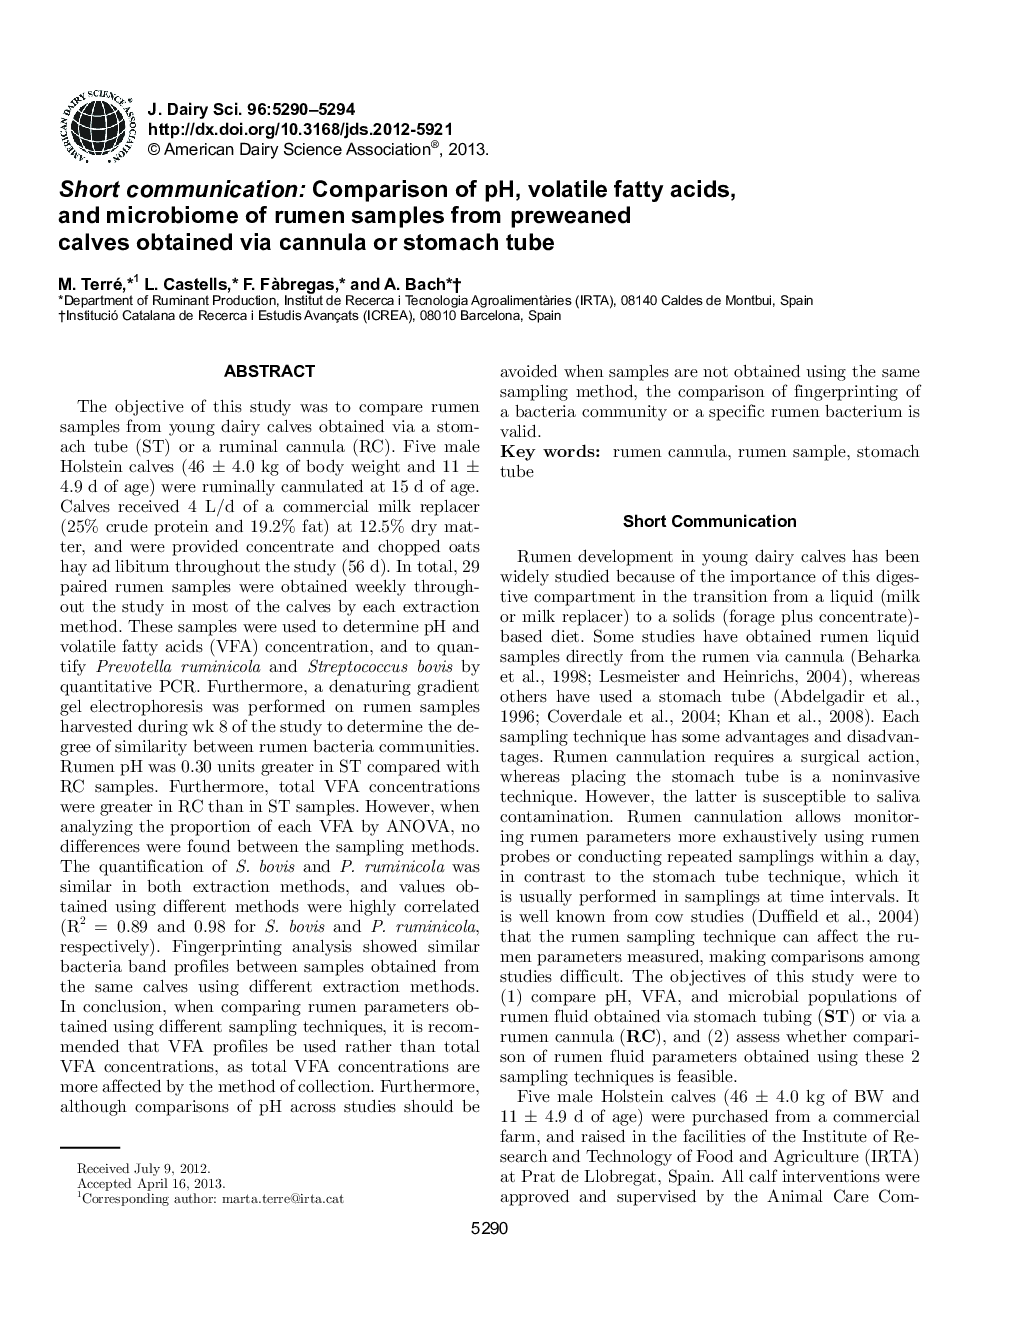 Short communication: Comparison of pH, volatile fatty acids, and microbiome of rumen samples from preweaned calves obtained via cannula or stomach tube